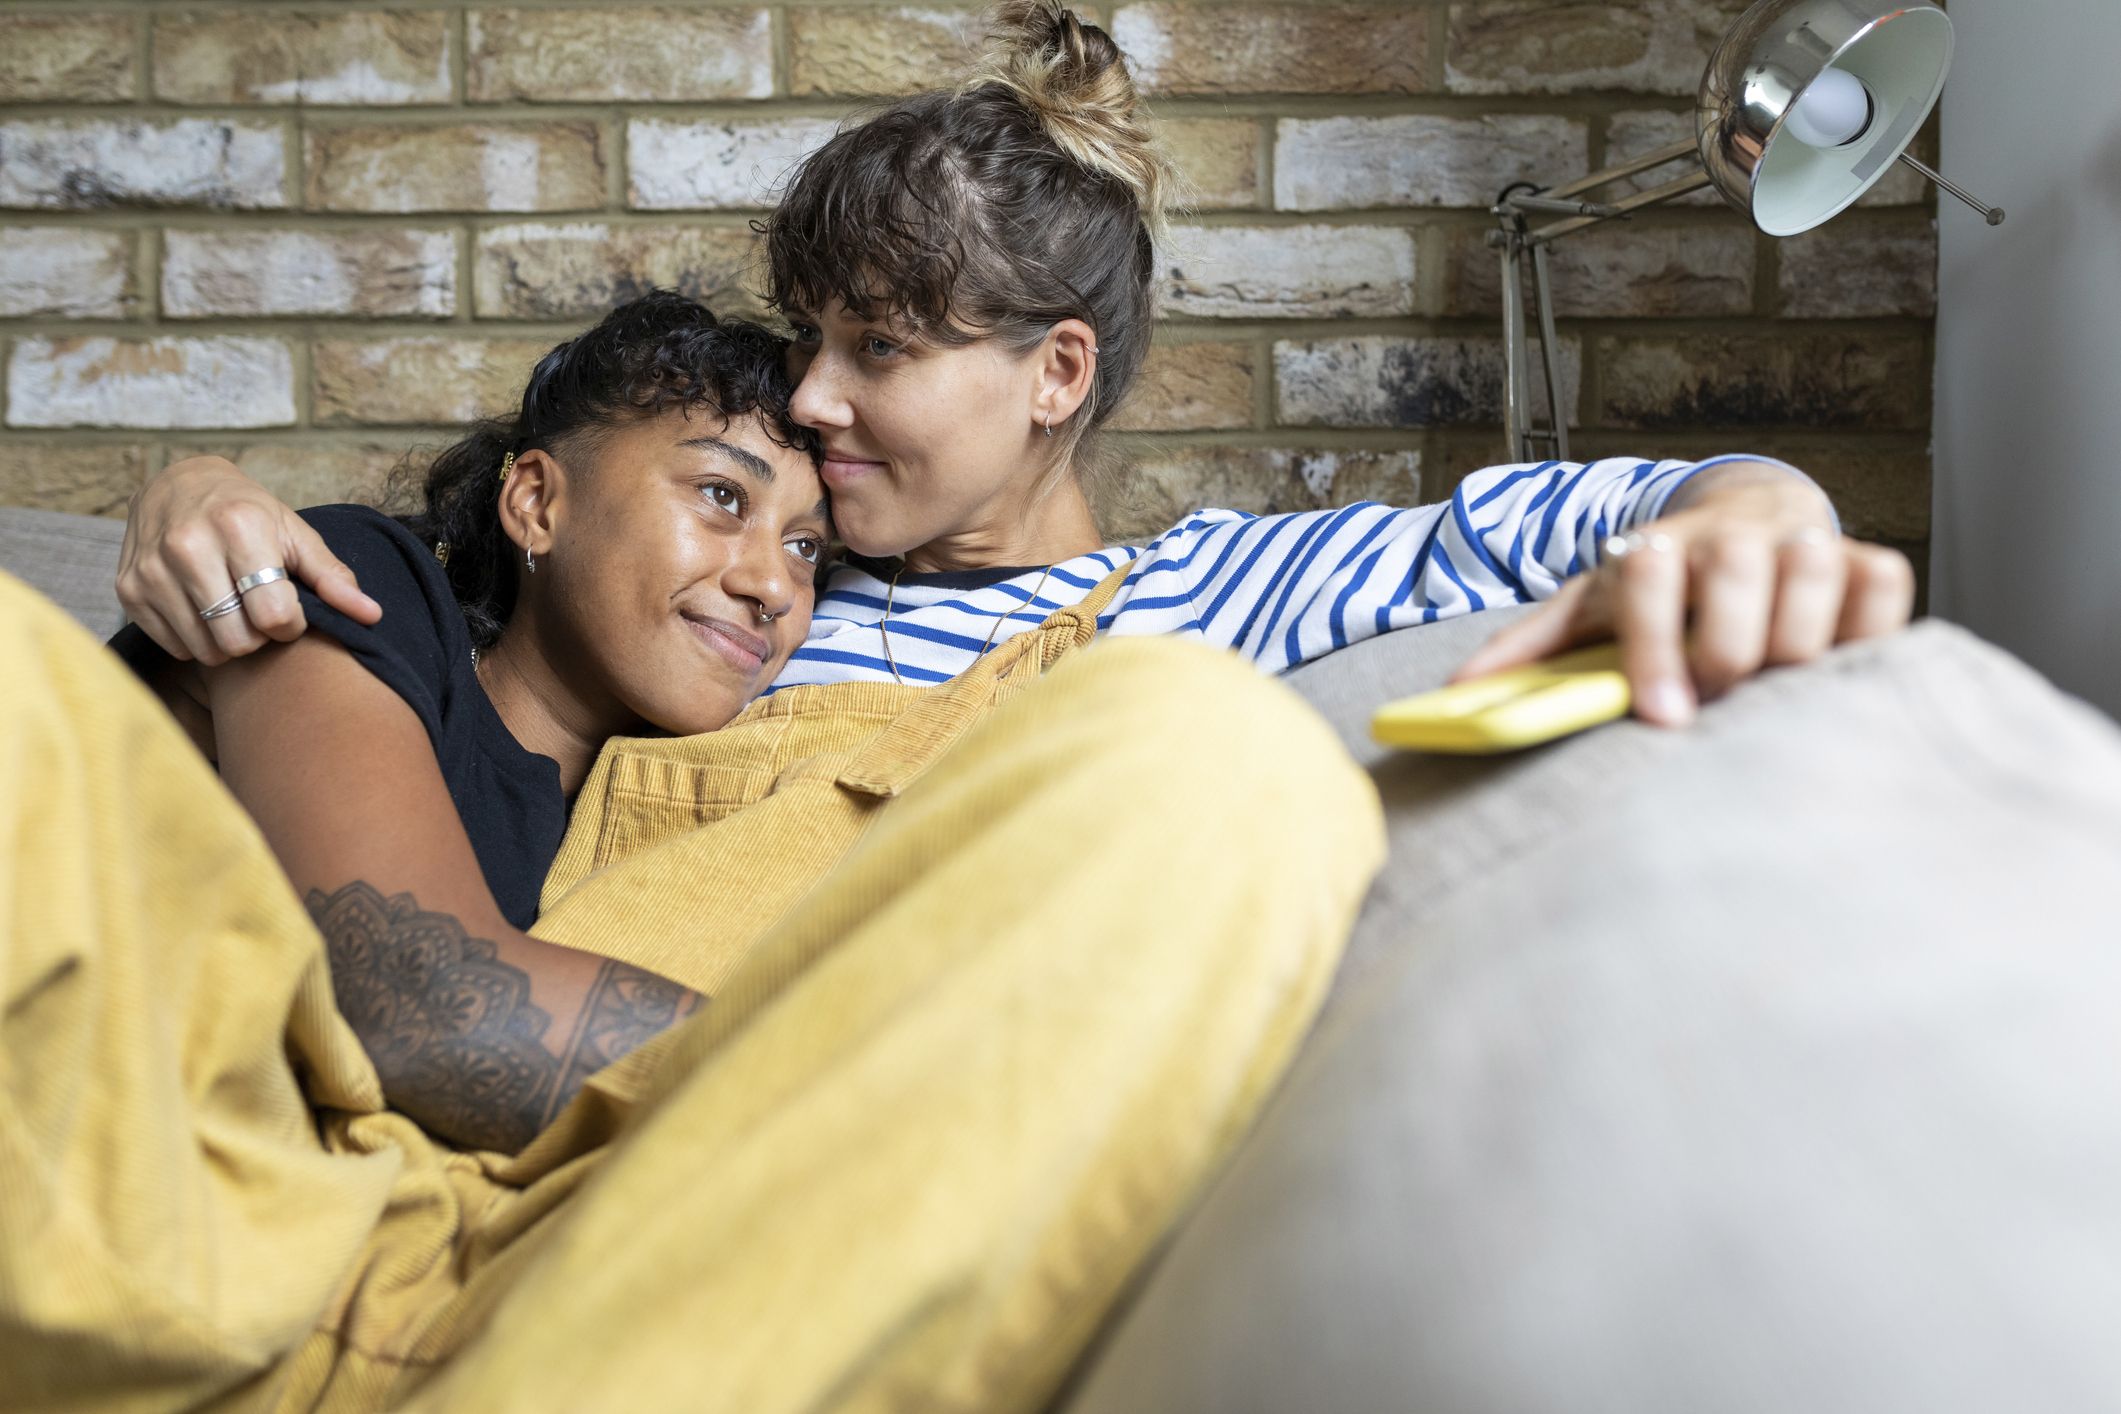 Girl On Girl For Boy - Am I a lesbian? How to know if you're a lesbian